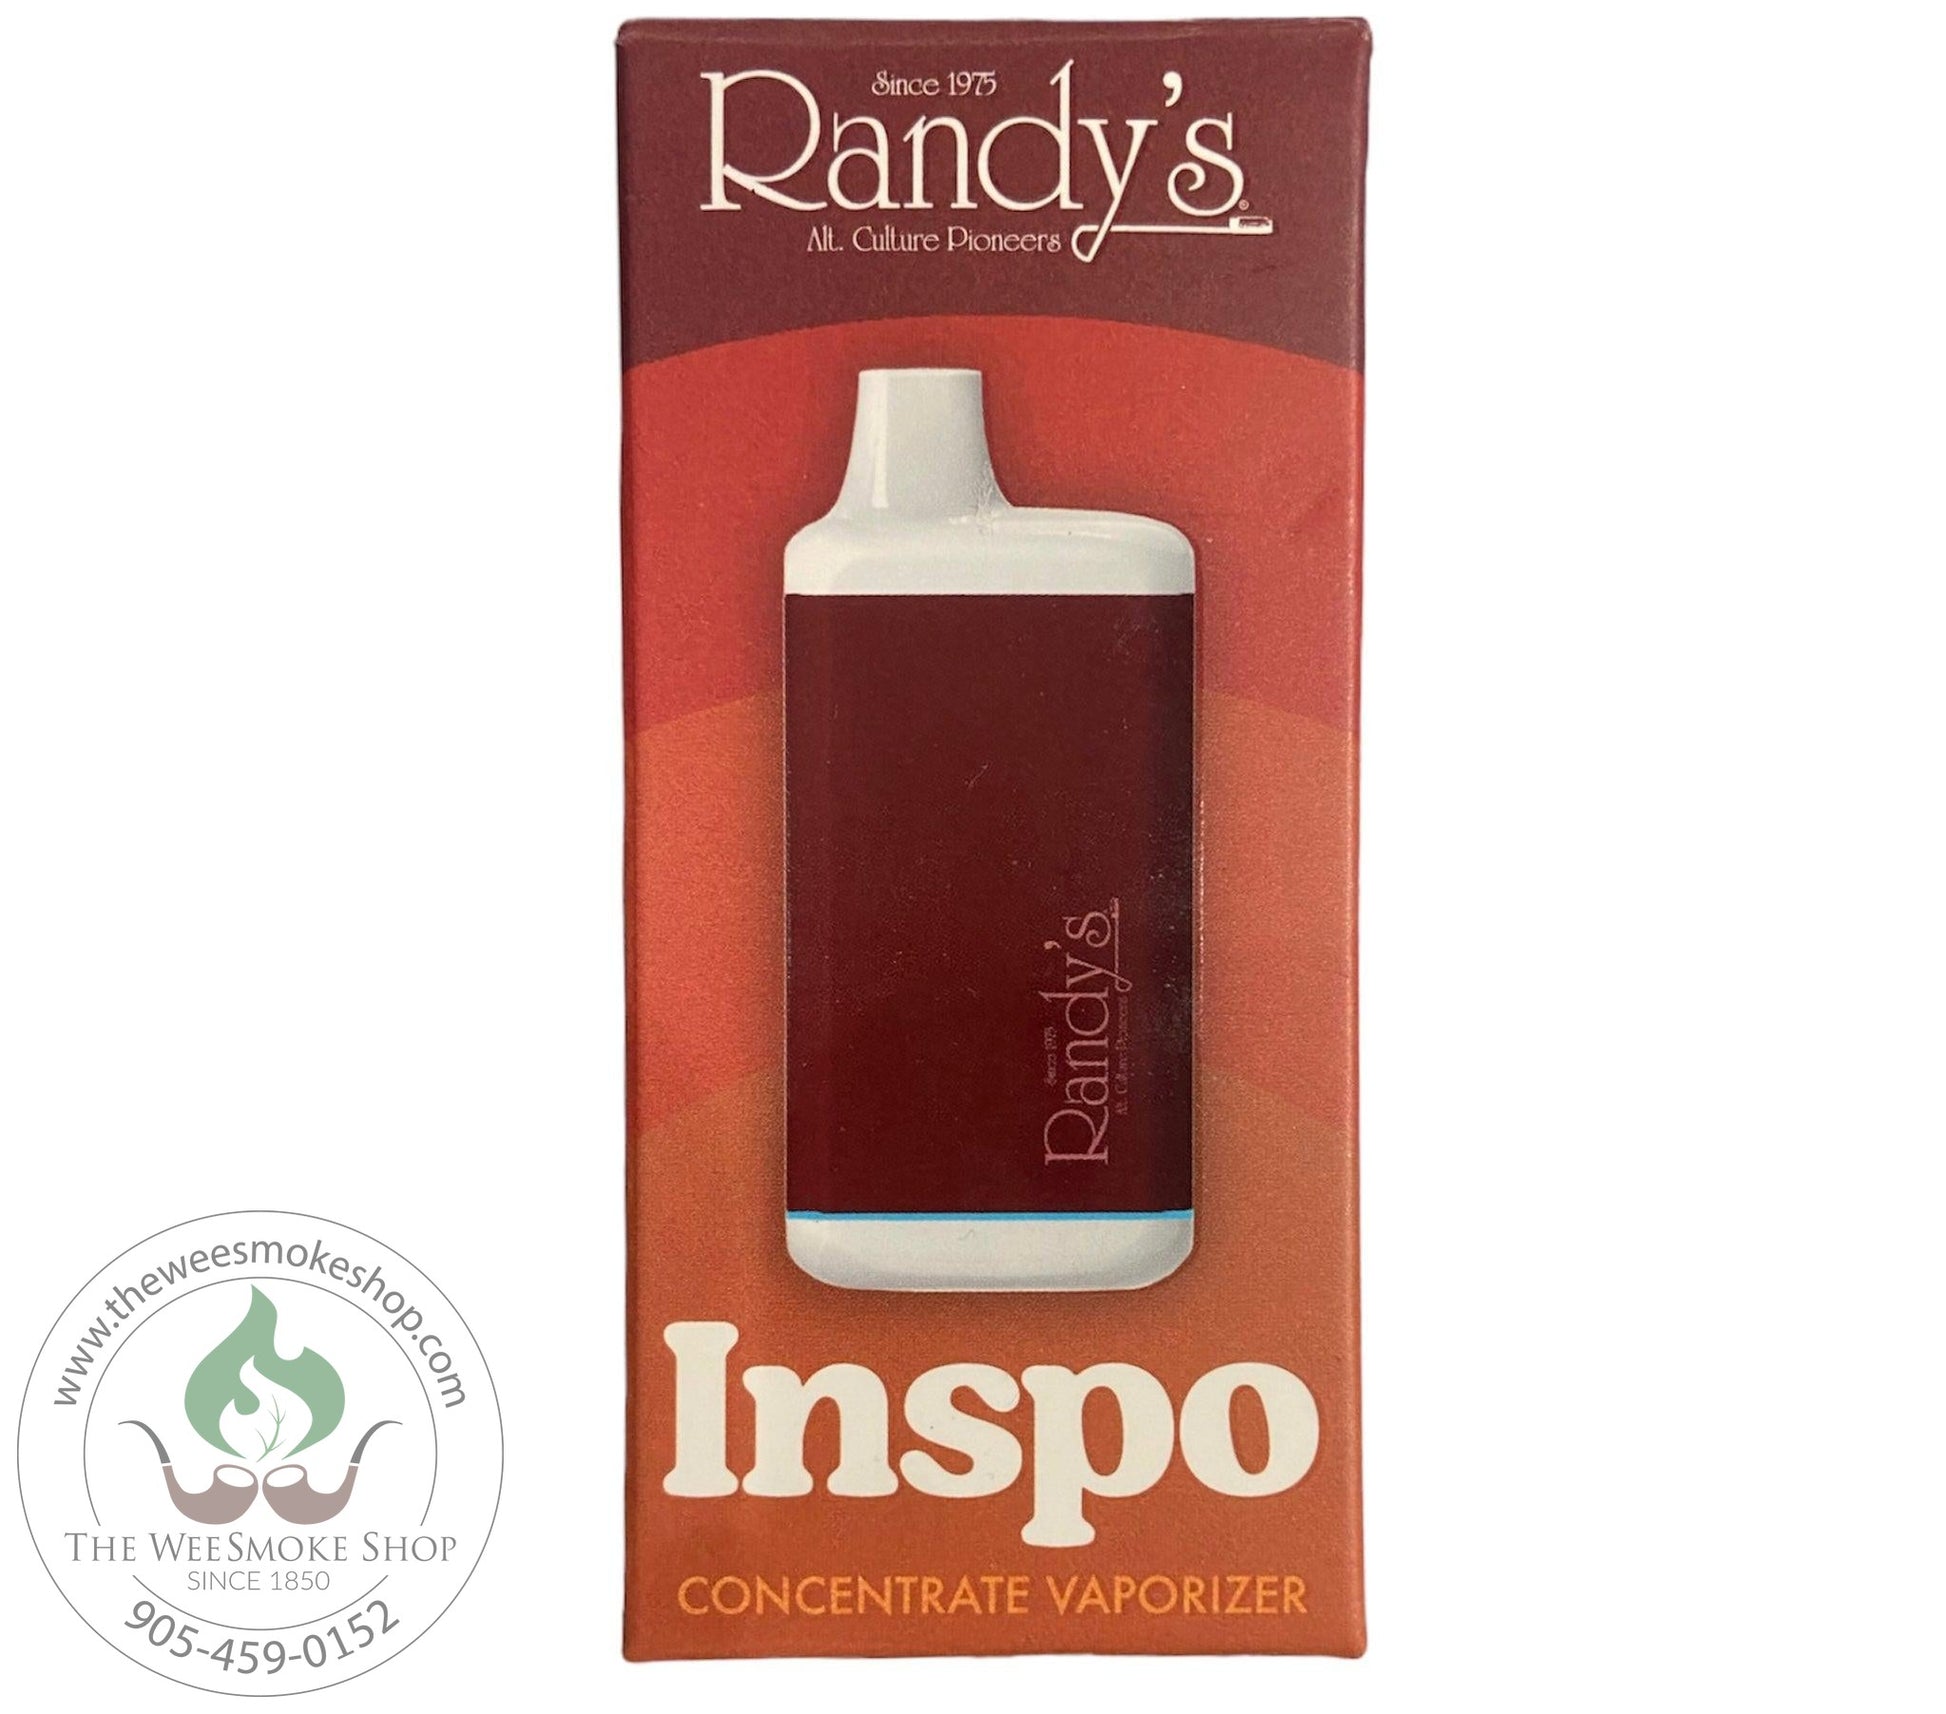 Randy's Inspo Concentrate Vaporizer-The Wee Smoke Shop